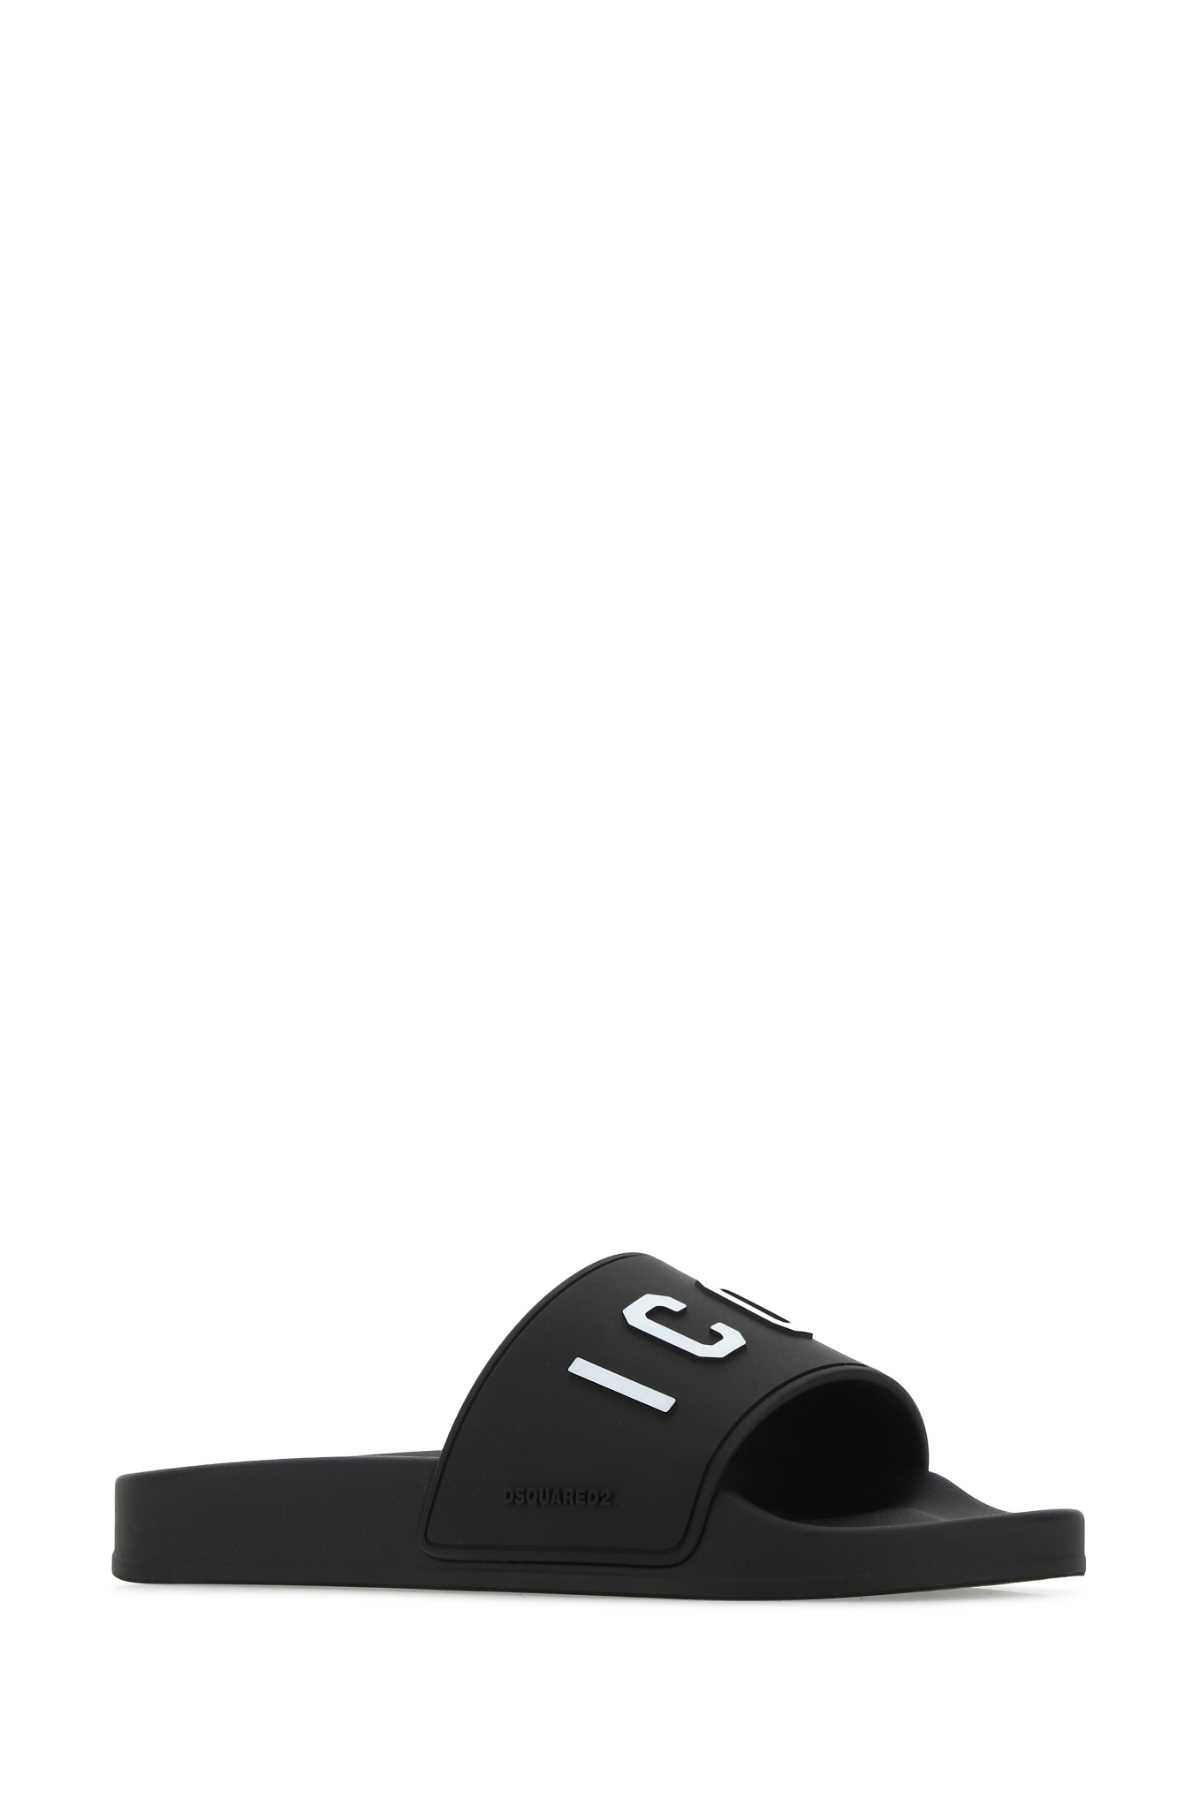 Dsquared2 Black Rubber Slippers